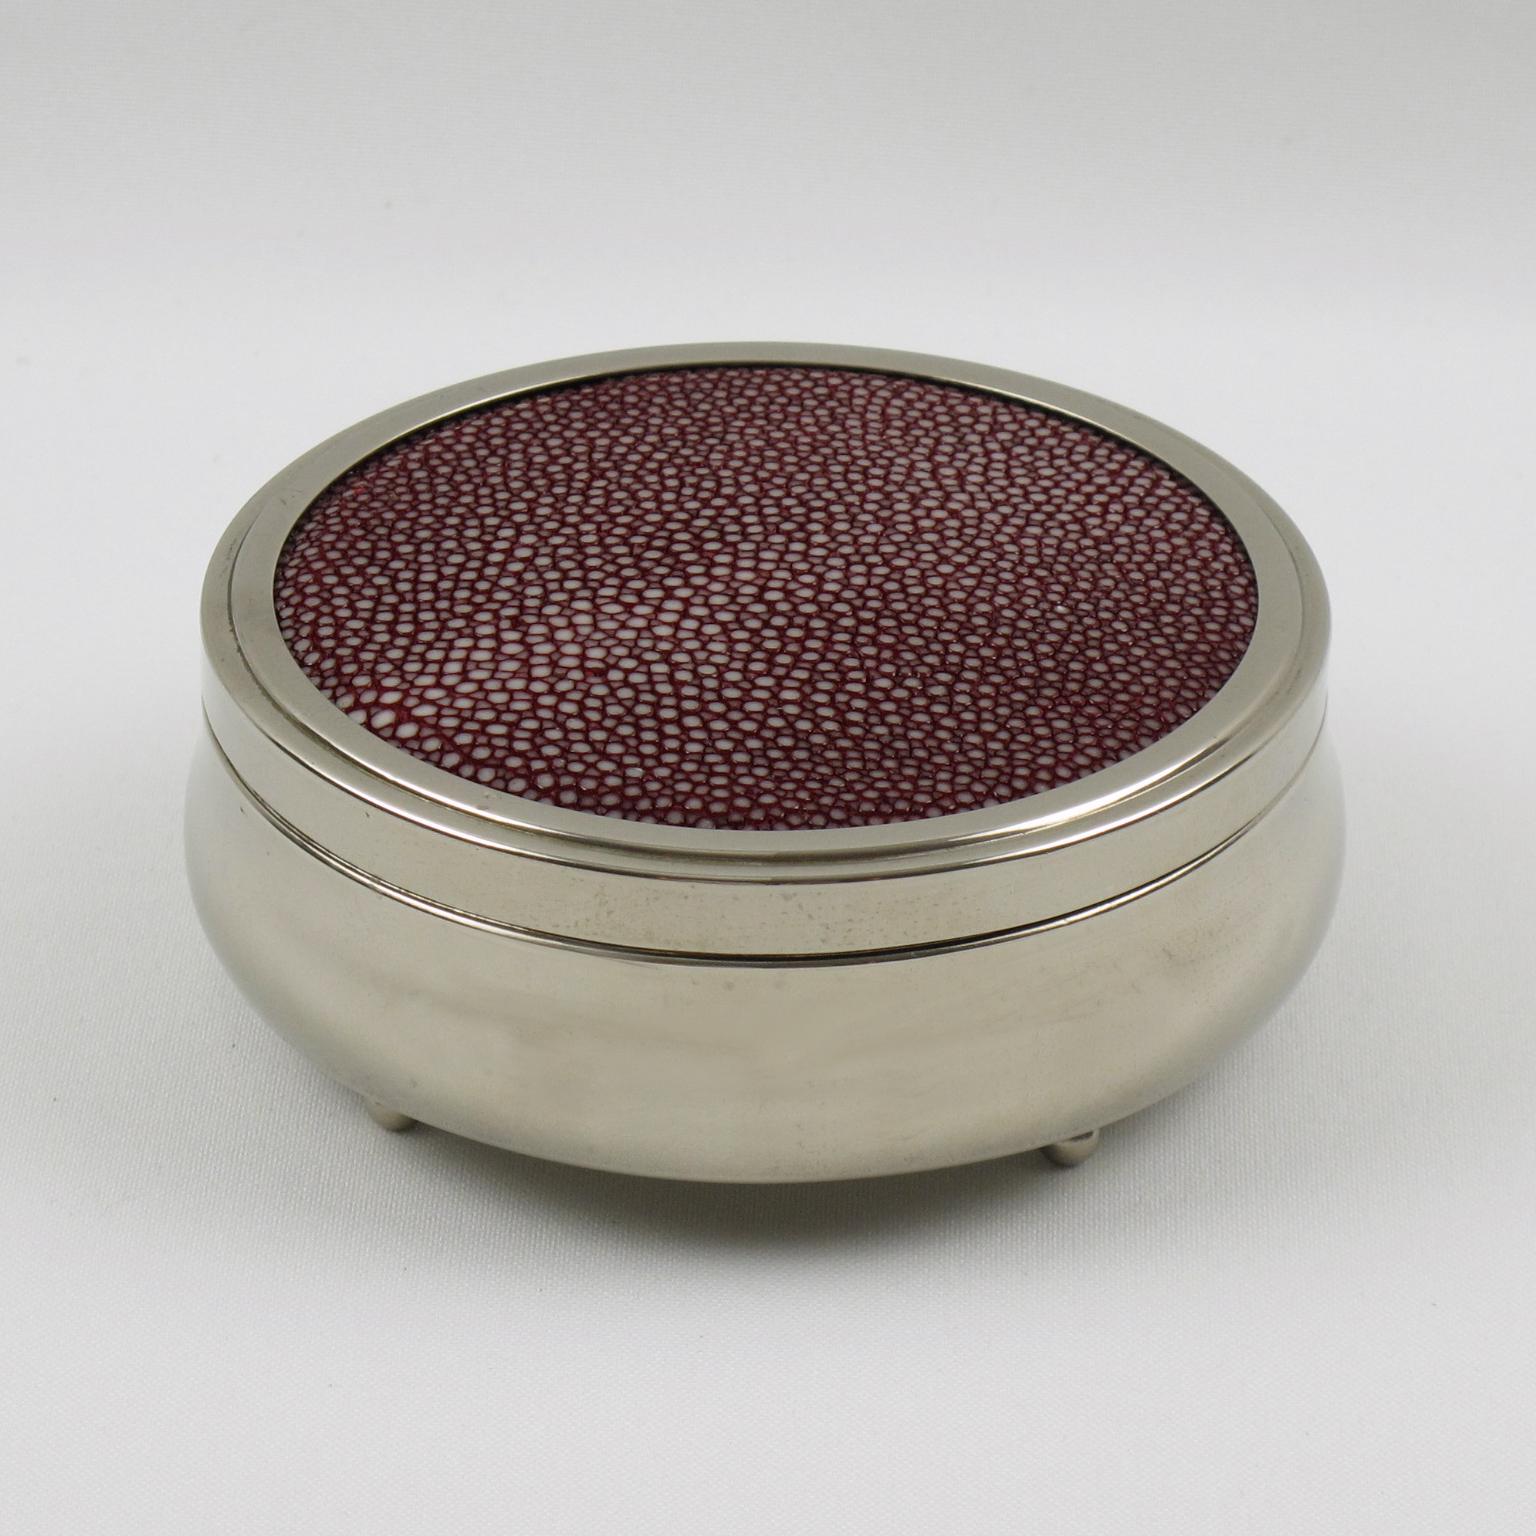 Lovely Art Deco round lidded box. Chromed metal round geometric shape with rare real red shagreen lid. Interior in blue velvet and tiny chrome ball feet.
Measures: 4.50 in. diameter (11.5 cm) x 1.57 in. high (4 cm).